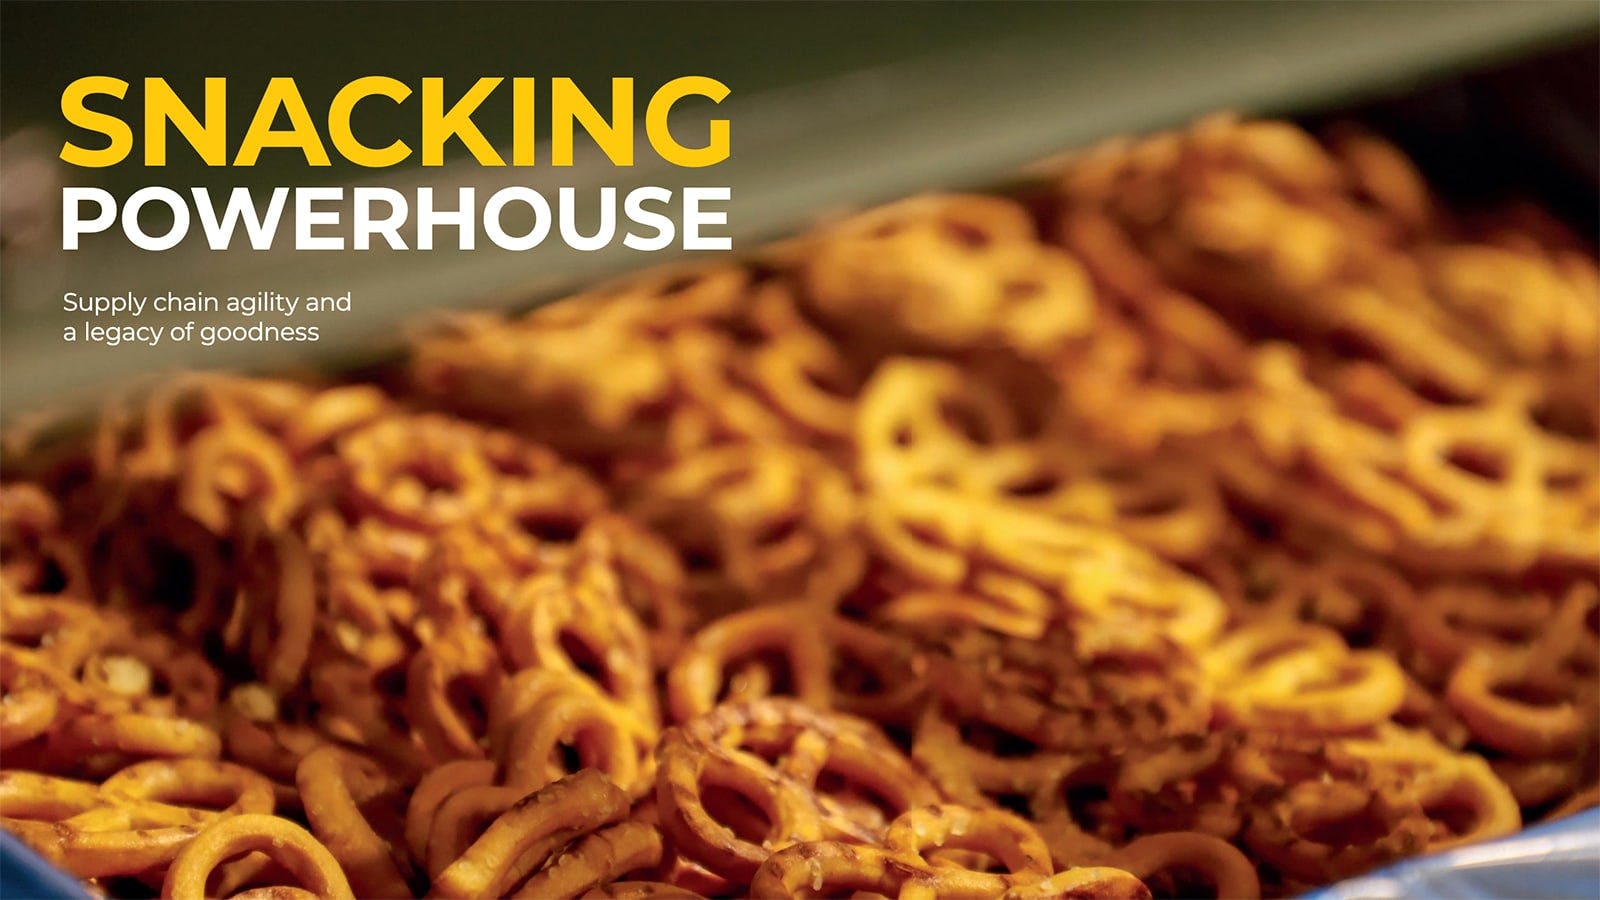 Snacking Powerhouse: Supply Chain Agility and a Legacy of Goodness